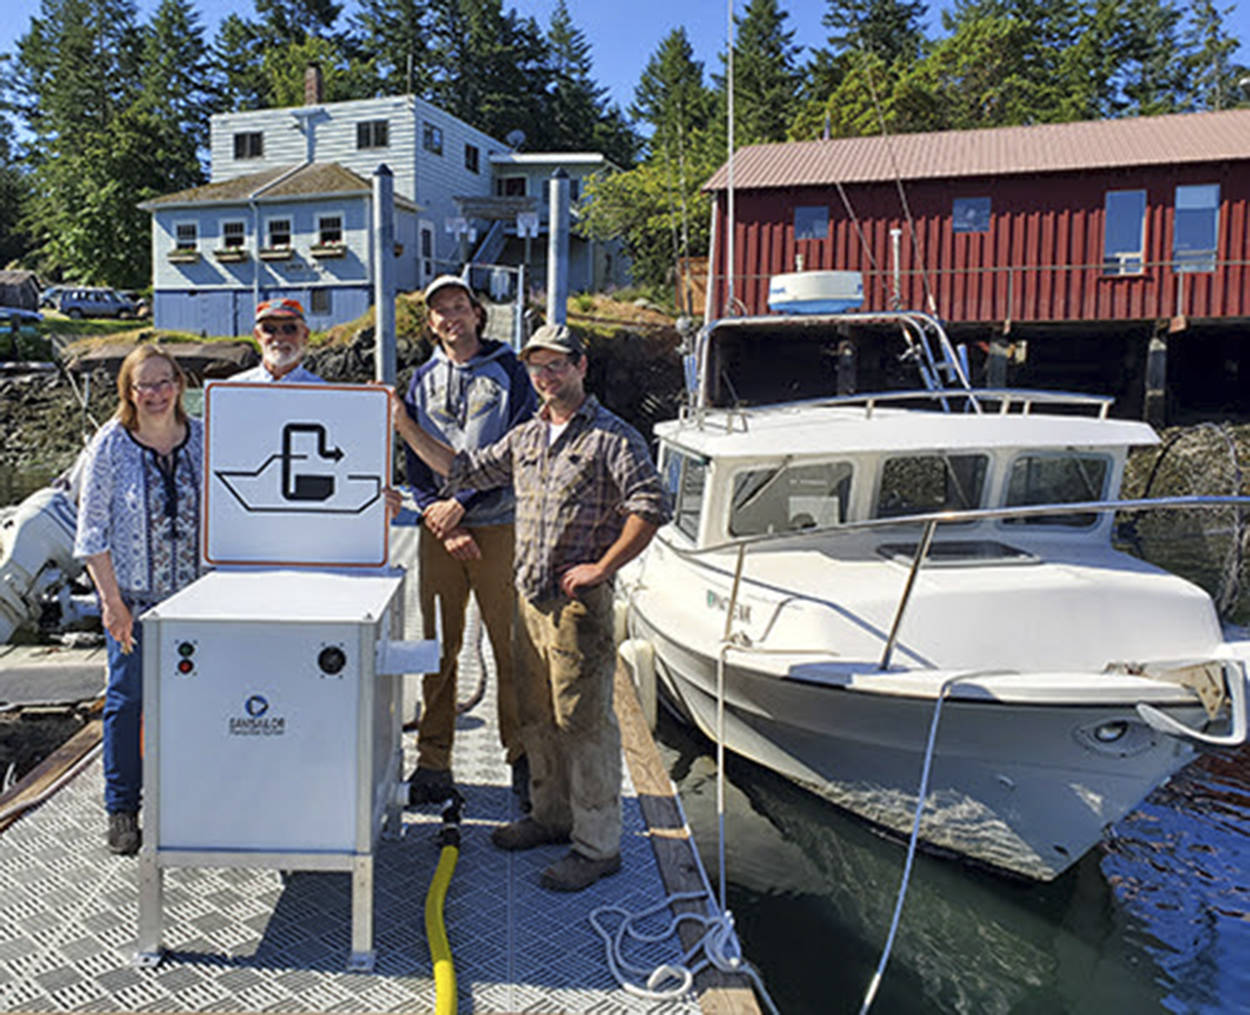 Washington State Parks/Contributed photo                                (From left to right): Owners Terri and Steve Mason and employees Nick Burne and Jonathan Hogue stand by the new pumpout facility located at the Shaw Island General Store.